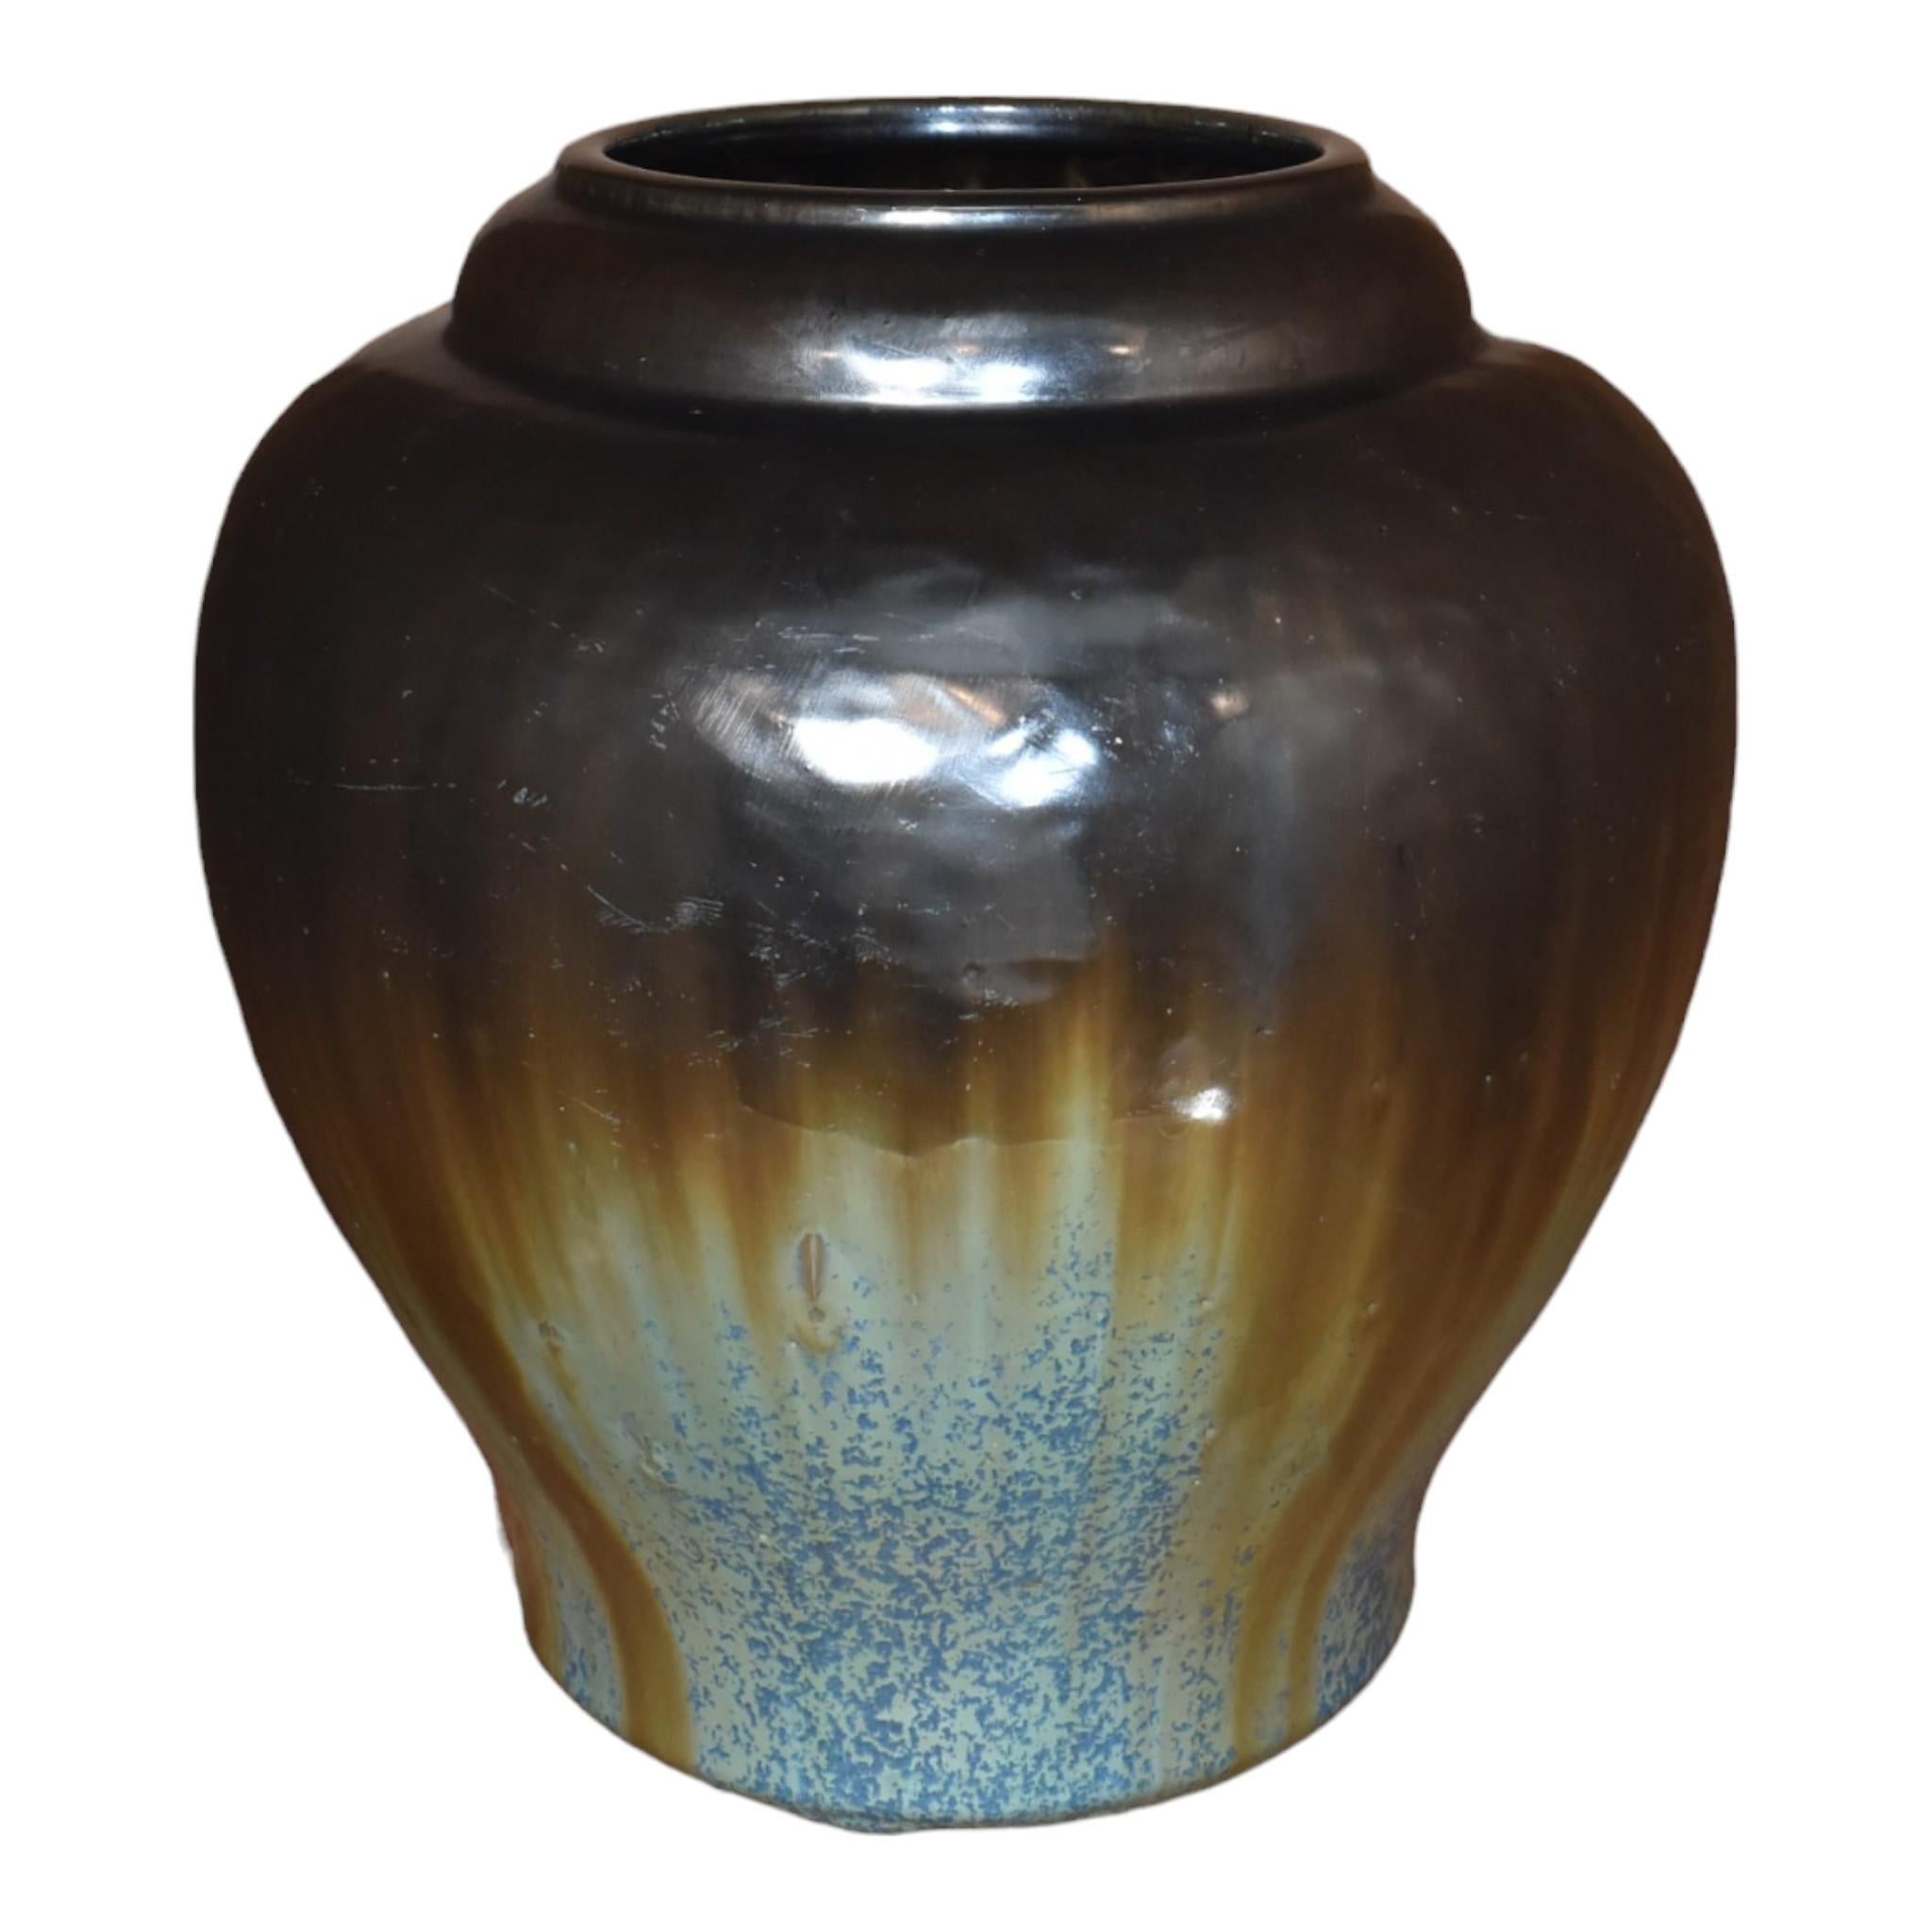 Fulper 1917-23 Arts And Crafts Pottery Black Blue Flambe Glaze Ceramic Vase 591 In Good Condition For Sale In East Peoria, IL